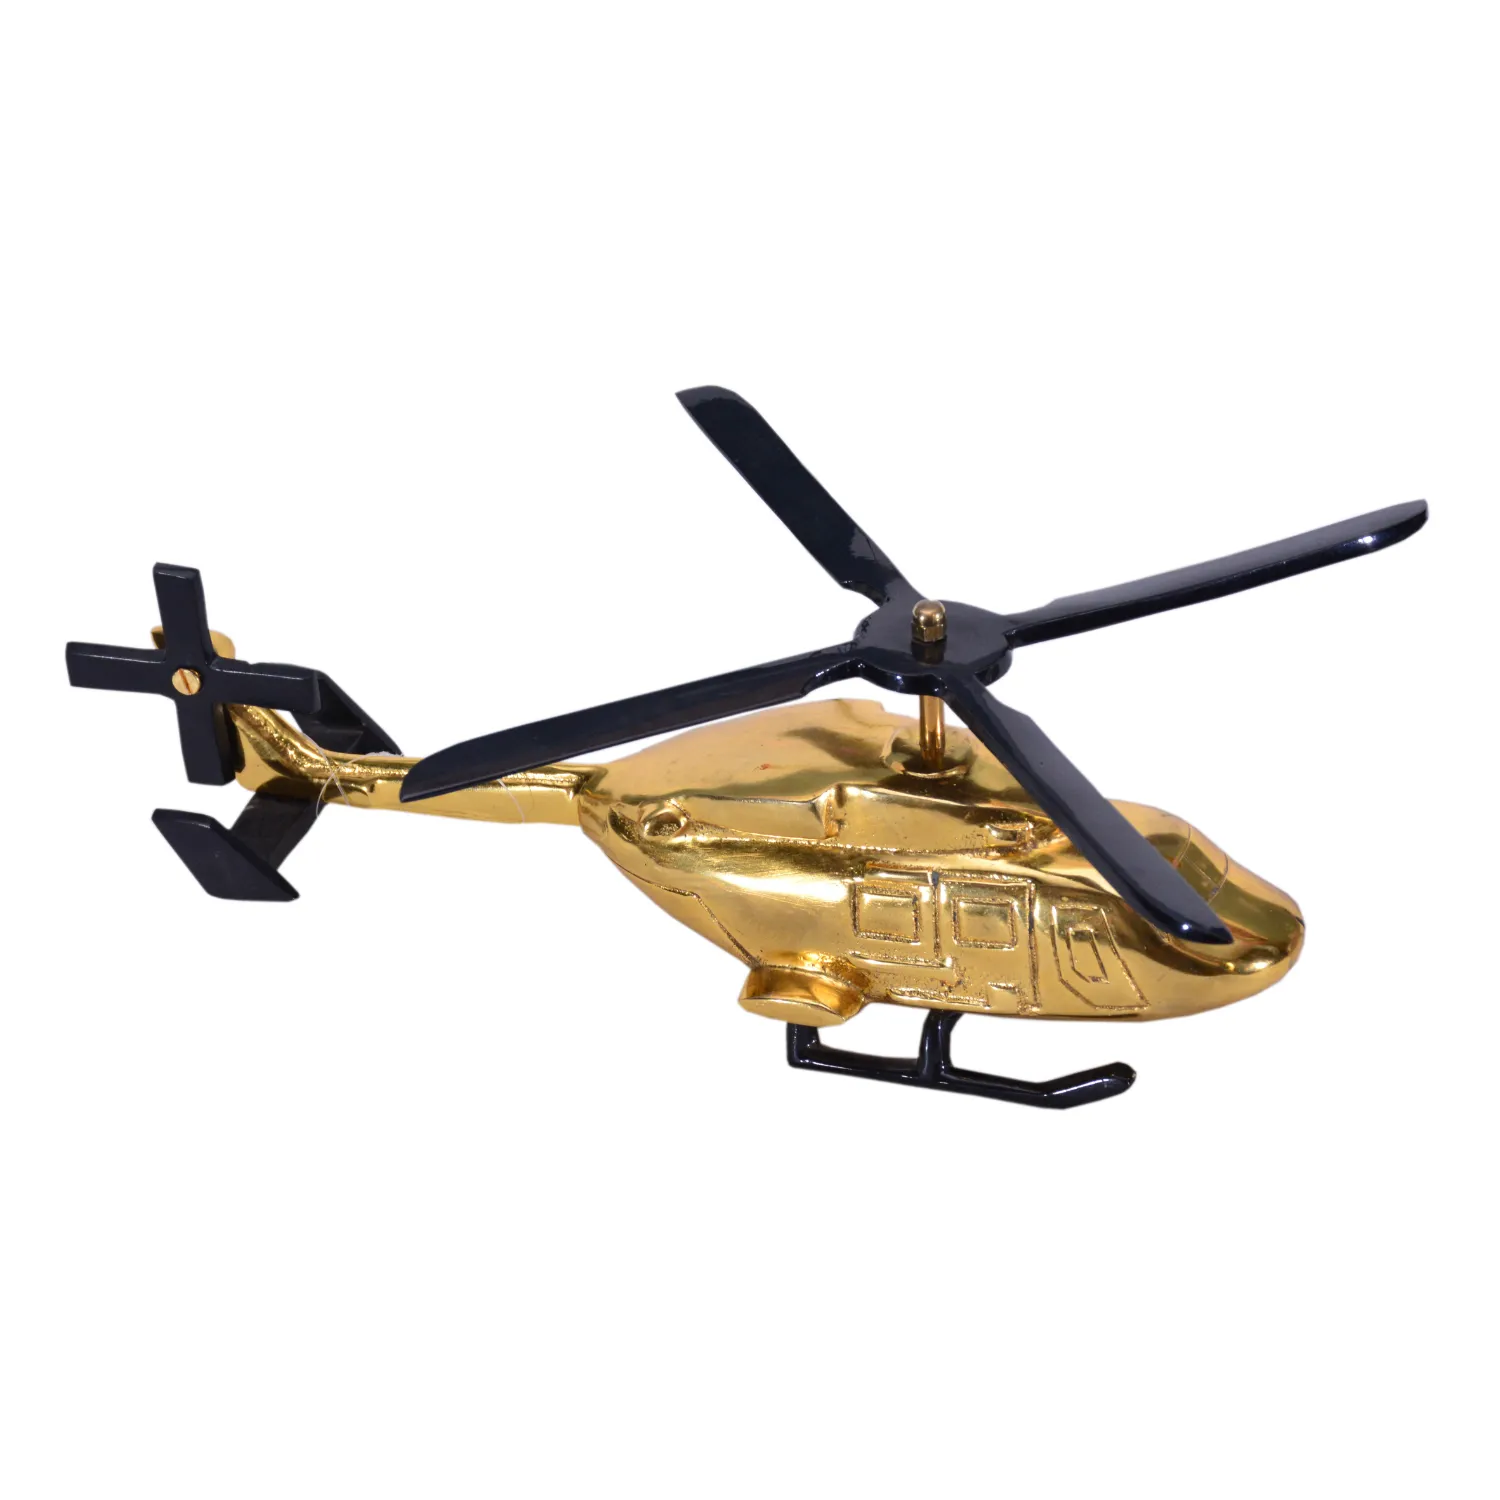 HELICOPTER AIRCRAFT SCALE MODEL AVIATIION